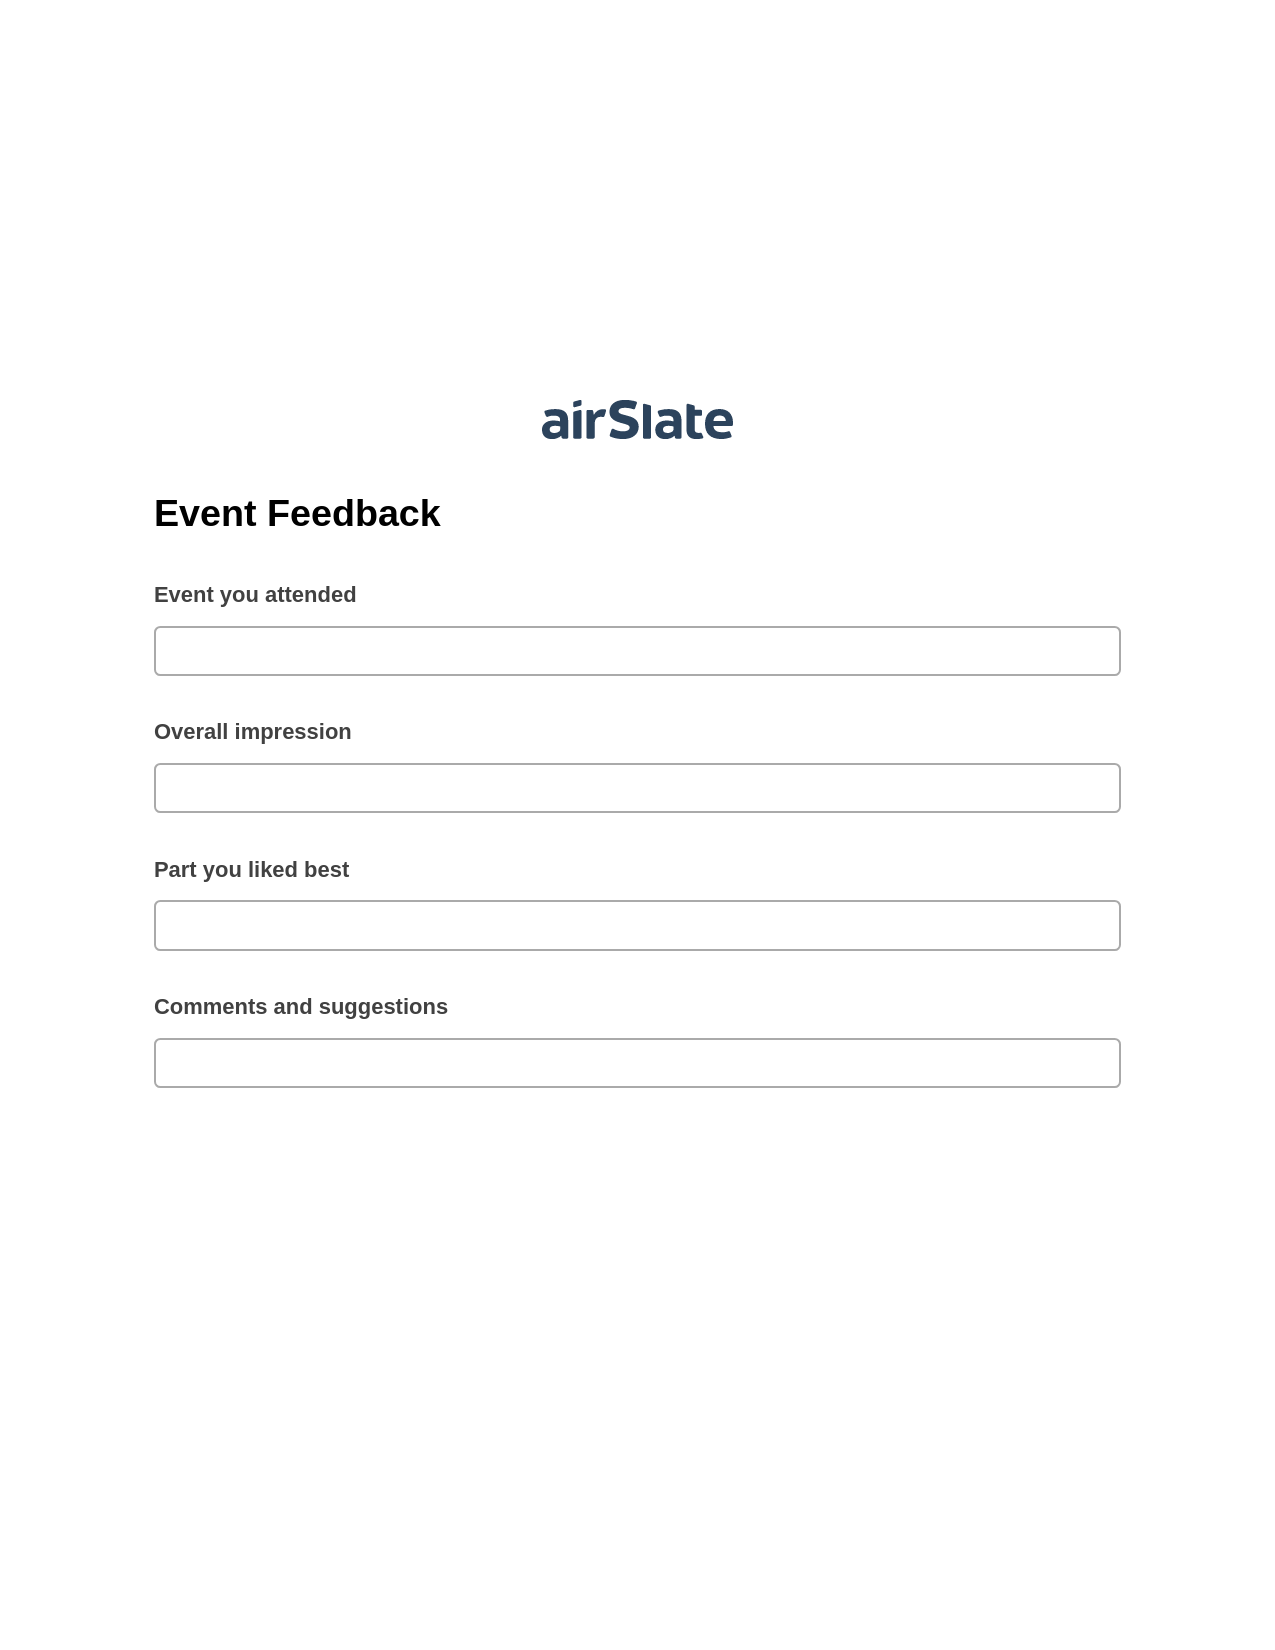 Event Feedback Pre-fill Dropdown from Airtable, SendGrid send Campaign bot, Text Message Notification Postfinish Bot